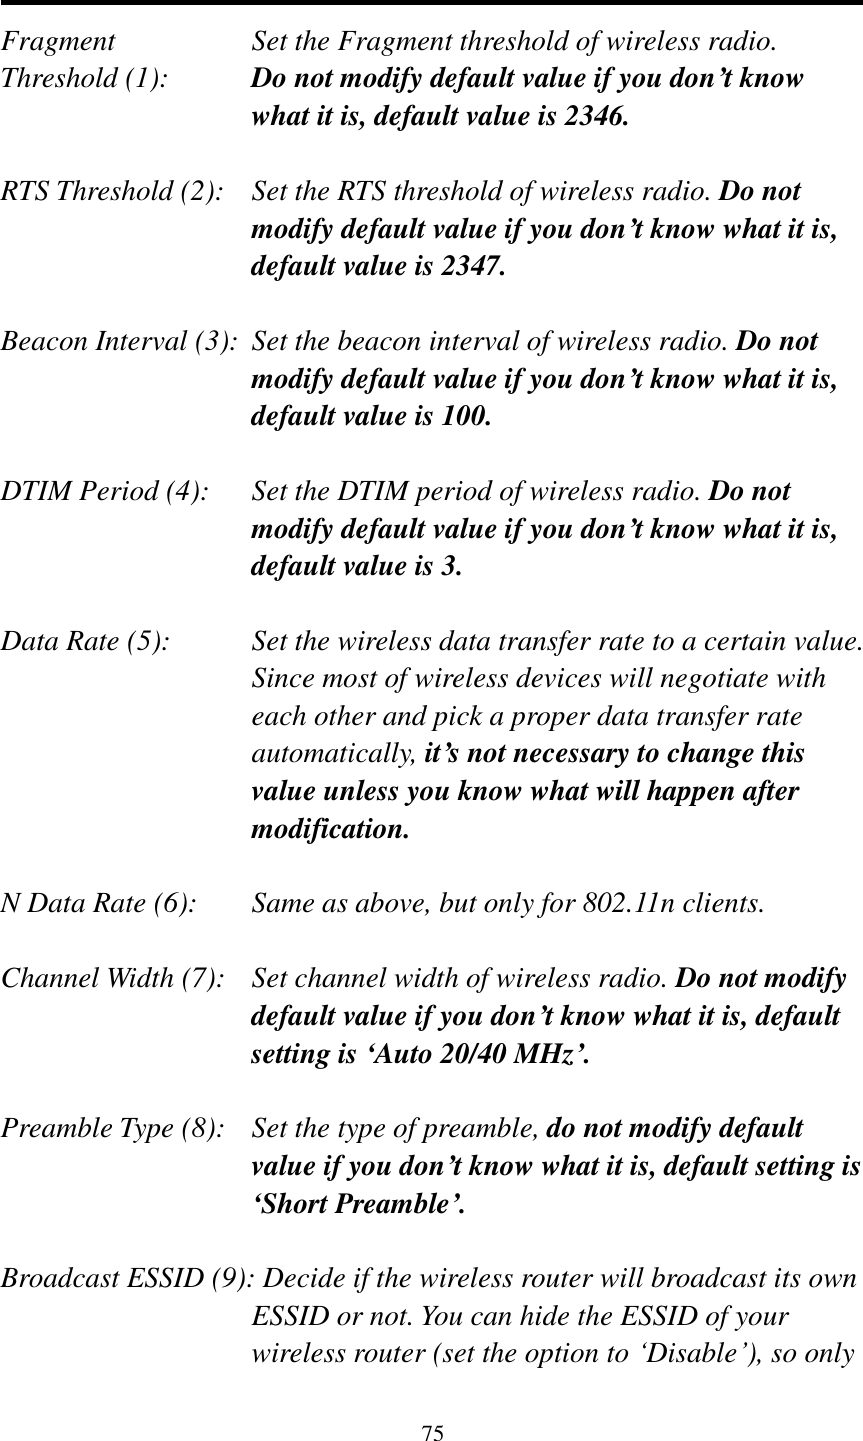 75   Fragment  Set the Fragment threshold of wireless radio.    Threshold (1):  Do not modify default value if you don’t know what it is, default value is 2346.  RTS Threshold (2):    Set the RTS threshold of wireless radio. Do not modify default value if you don’t know what it is, default value is 2347.  Beacon Interval (3):  Set the beacon interval of wireless radio. Do not modify default value if you don’t know what it is, default value is 100.  DTIM Period (4):    Set the DTIM period of wireless radio. Do not modify default value if you don’t know what it is, default value is 3.  Data Rate (5):    Set the wireless data transfer rate to a certain value. Since most of wireless devices will negotiate with each other and pick a proper data transfer rate automatically, it’s not necessary to change this value unless you know what will happen after modification.  N Data Rate (6):   Same as above, but only for 802.11n clients.  Channel Width (7):   Set channel width of wireless radio. Do not modify default value if you don’t know what it is, default setting is ‘Auto 20/40 MHz’.  Preamble Type (8):   Set the type of preamble, do not modify default value if you don’t know what it is, default setting is ‘Short Preamble’.  Broadcast ESSID (9): Decide if the wireless router will broadcast its own ESSID or not. You can hide the ESSID of your wireless router (set the option to „Disable‟), so only 